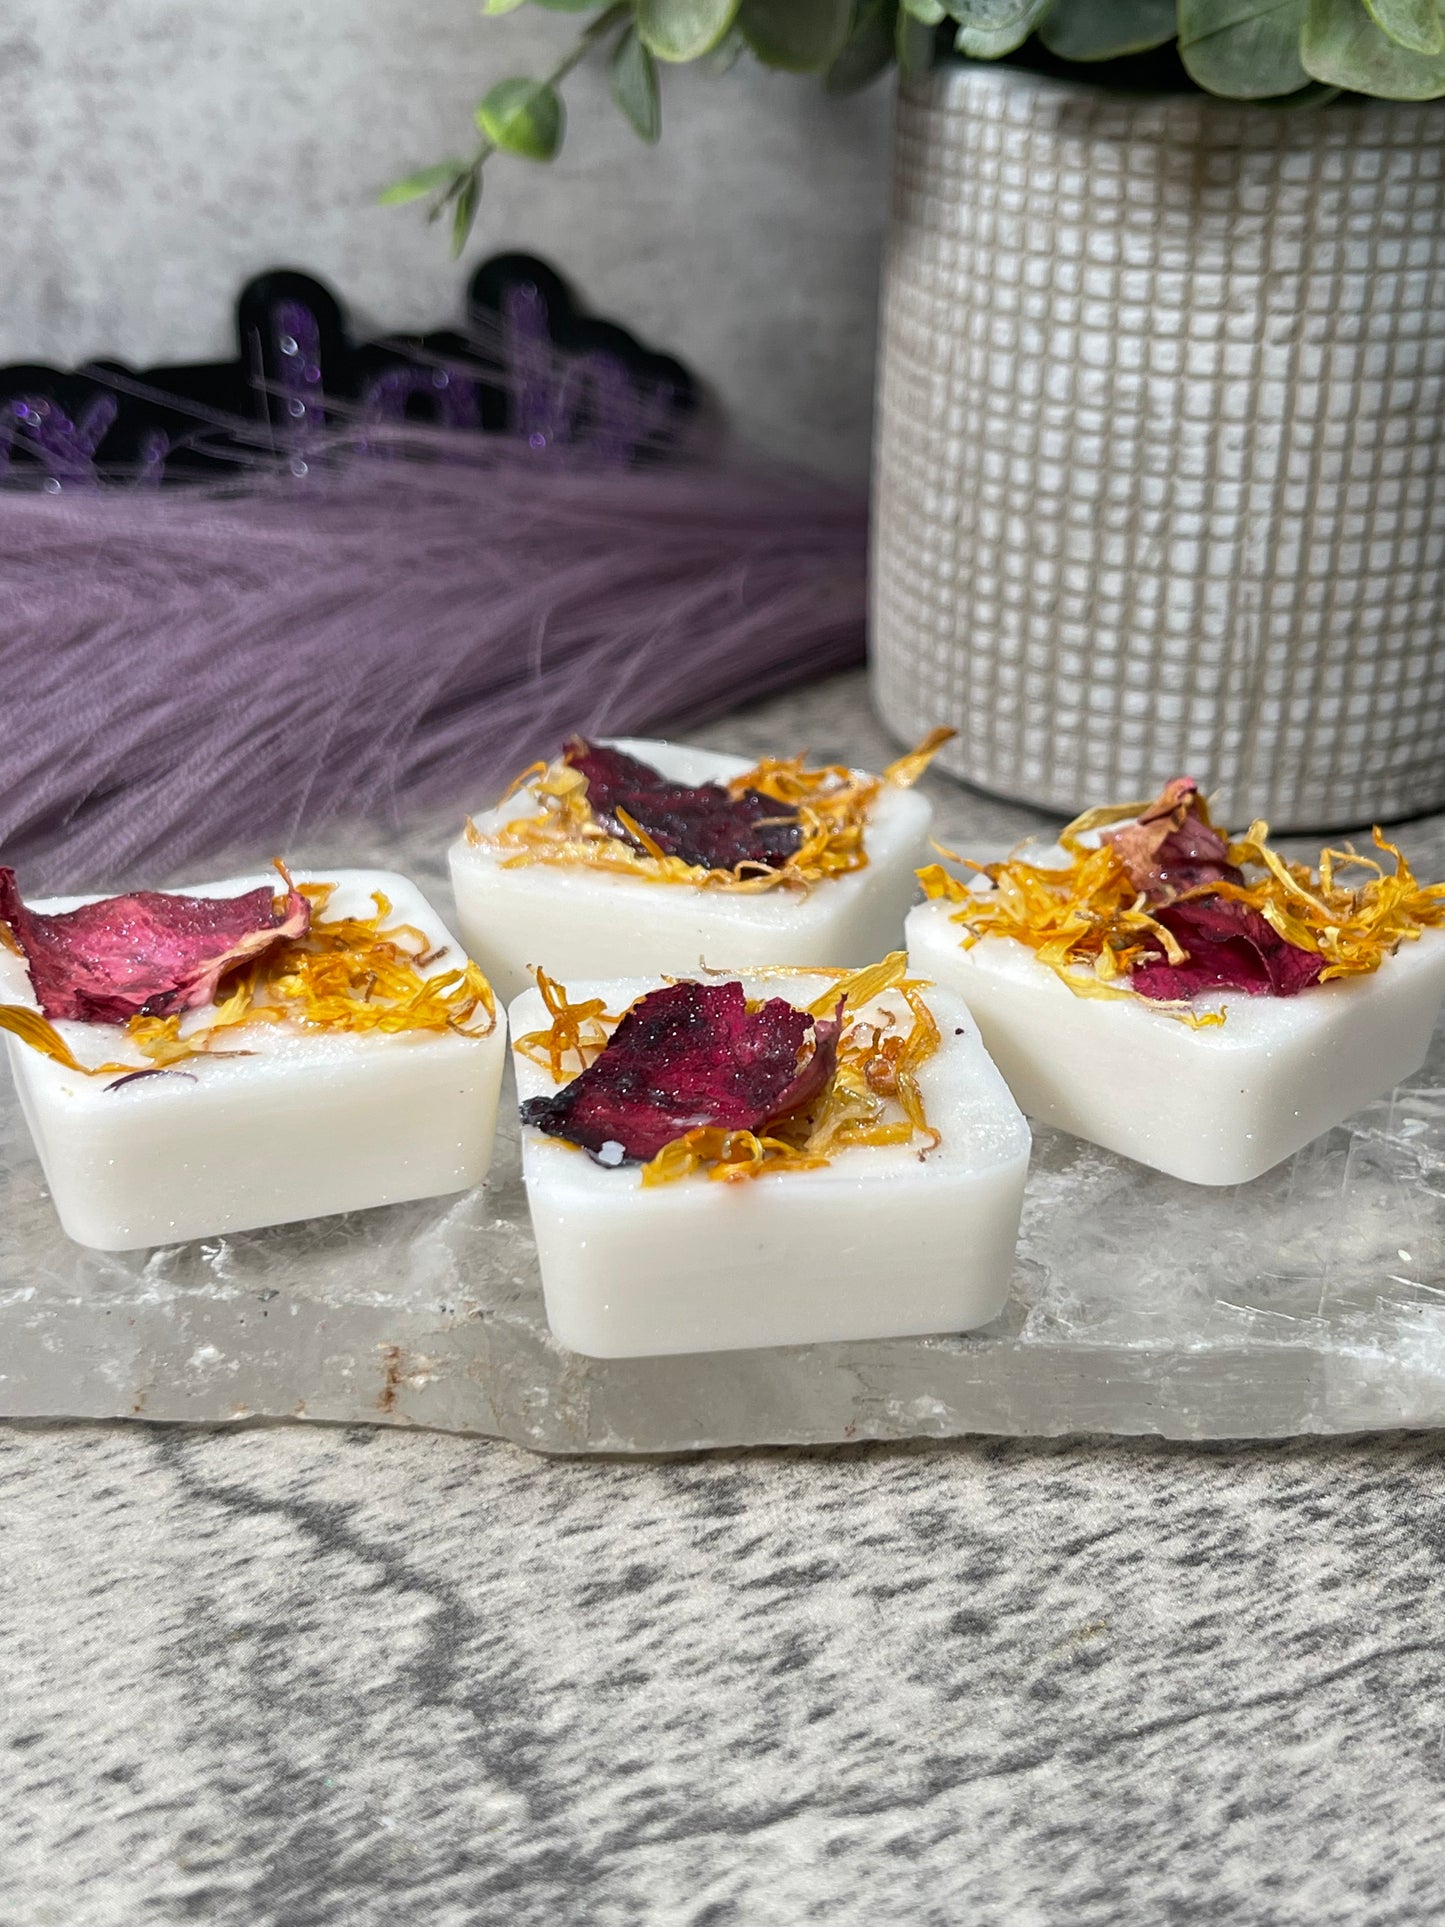 Square Wax Melts-Herbs/Dried Flowers